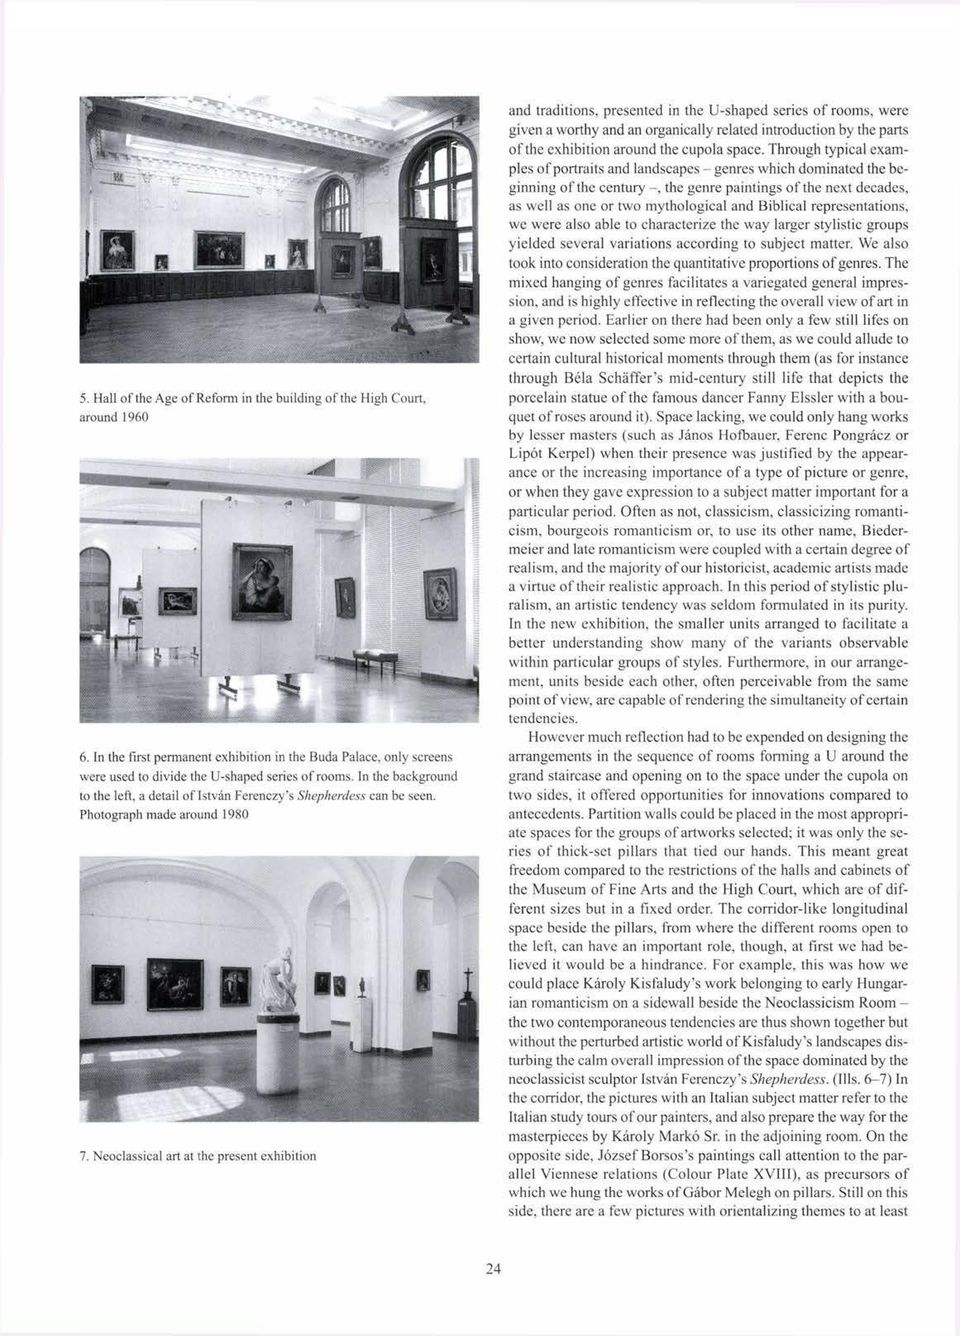 Neoclassical art at the present exhibition and traditions, presented in the U-shaped series of rooms, were given a worthy and an organically related introduction by the parts of the exhibition around